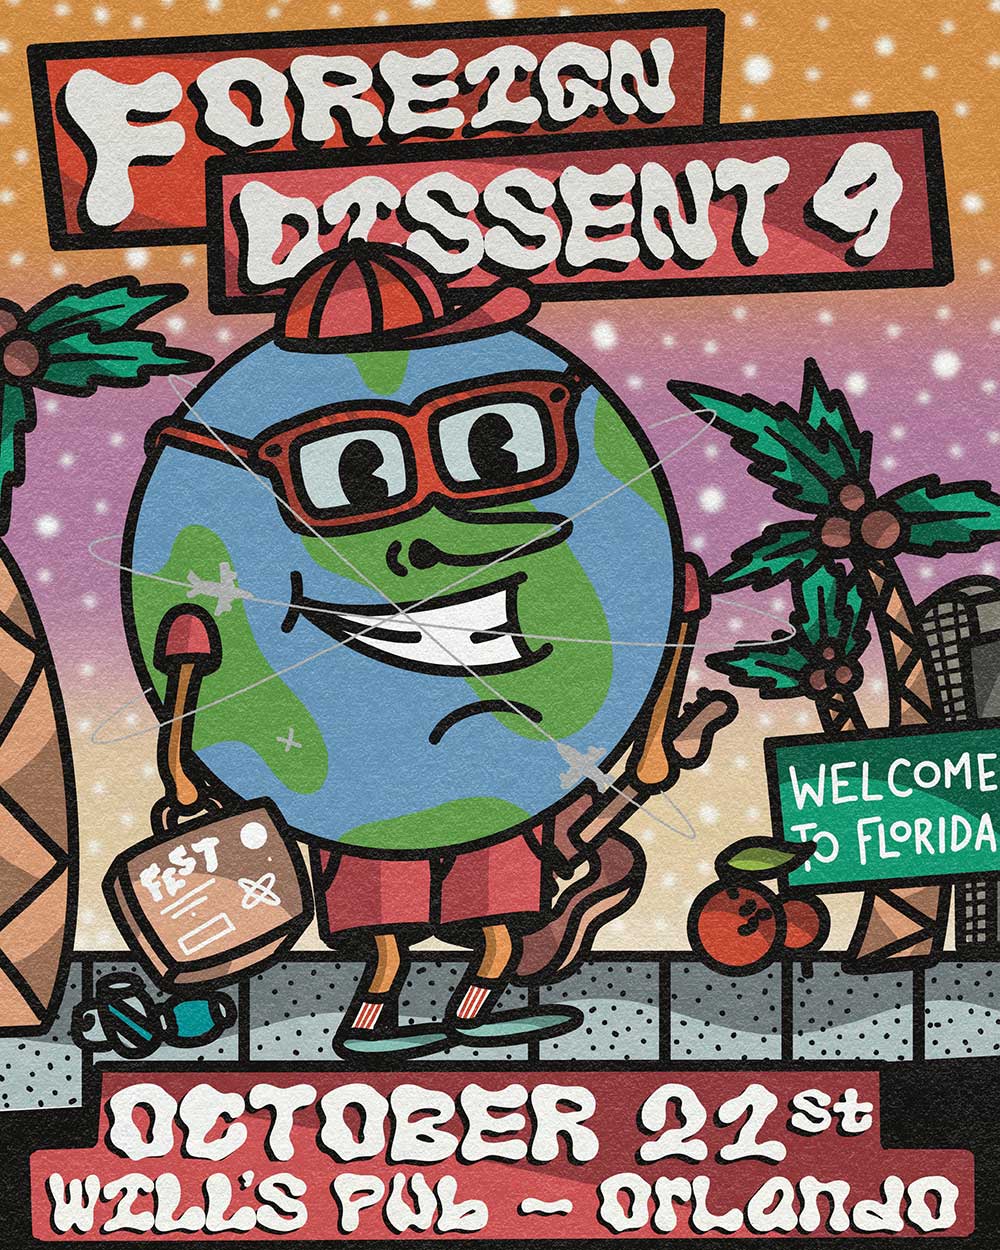 Foreign Dissent 9 is October 21 at Will's Pub in Orlando